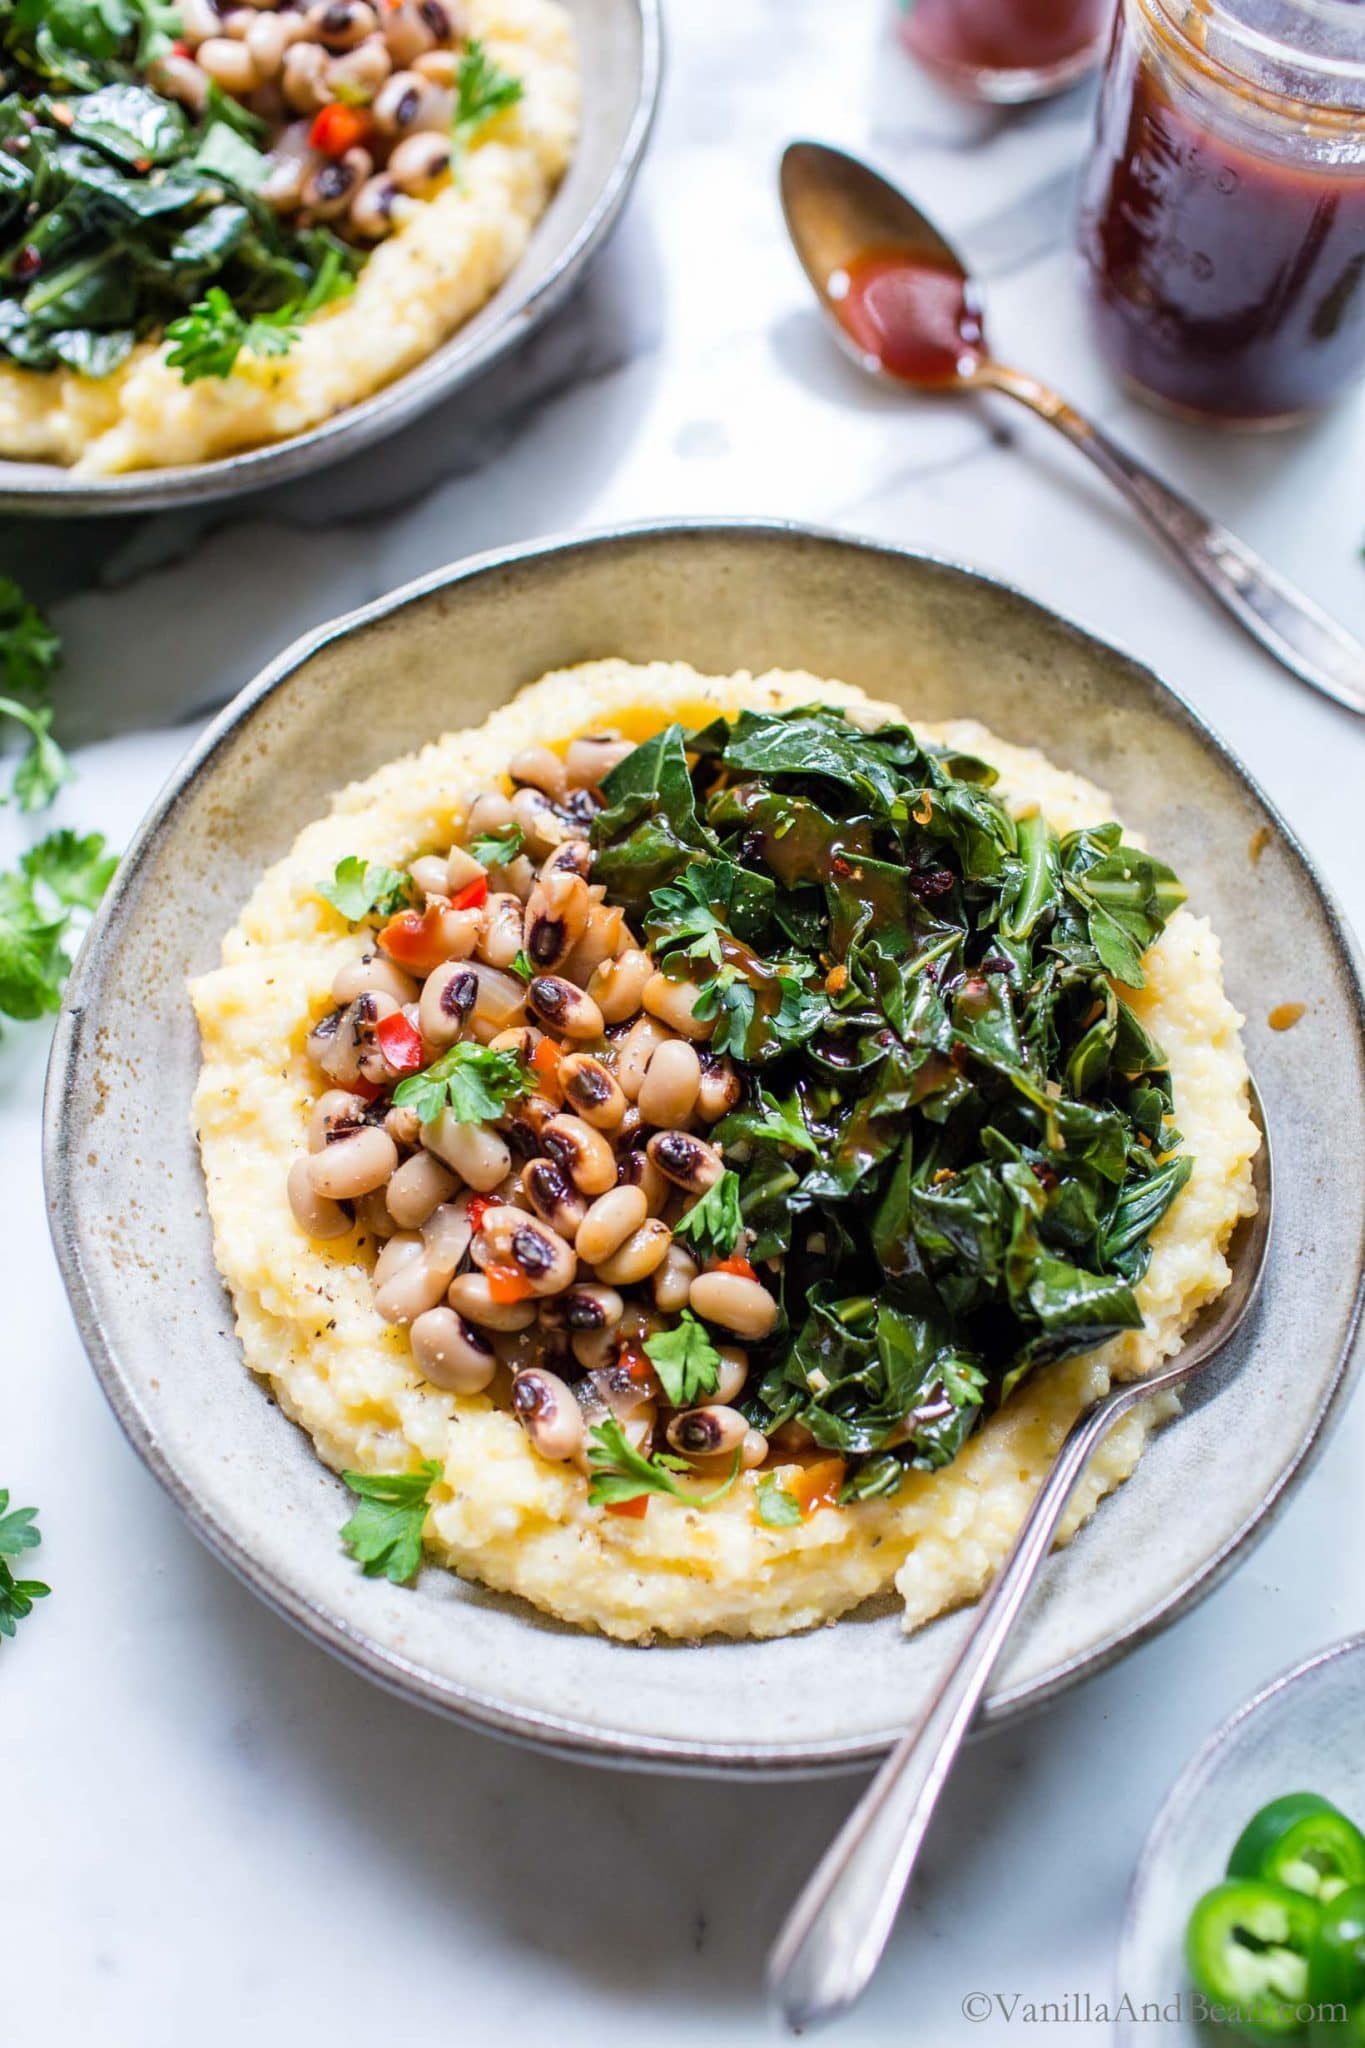 Black Eyed Peas With Smoky Collards And Cheesy Grits